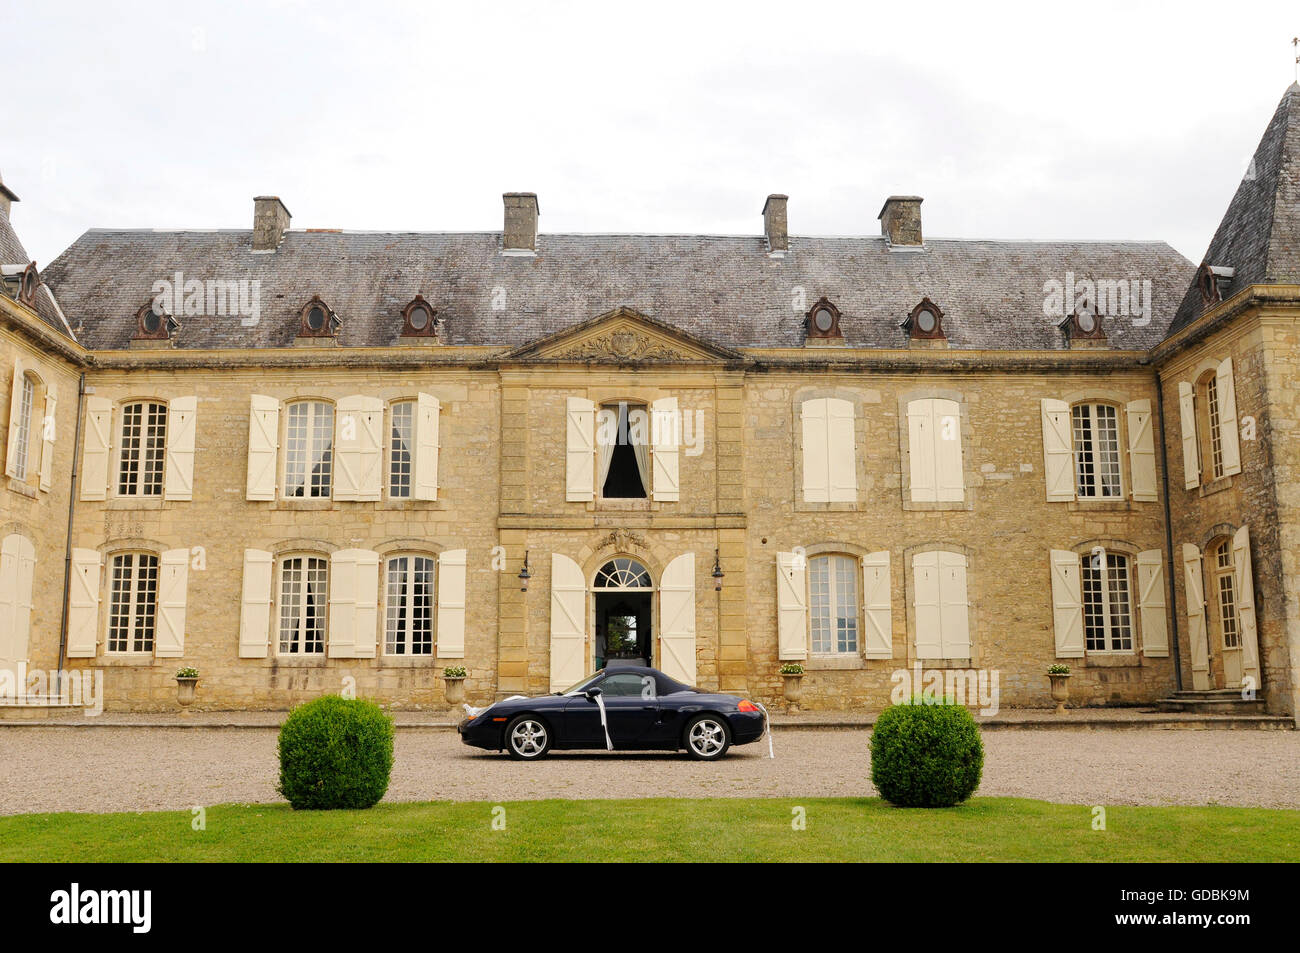 Car parked in front of a chateau Stock Photo